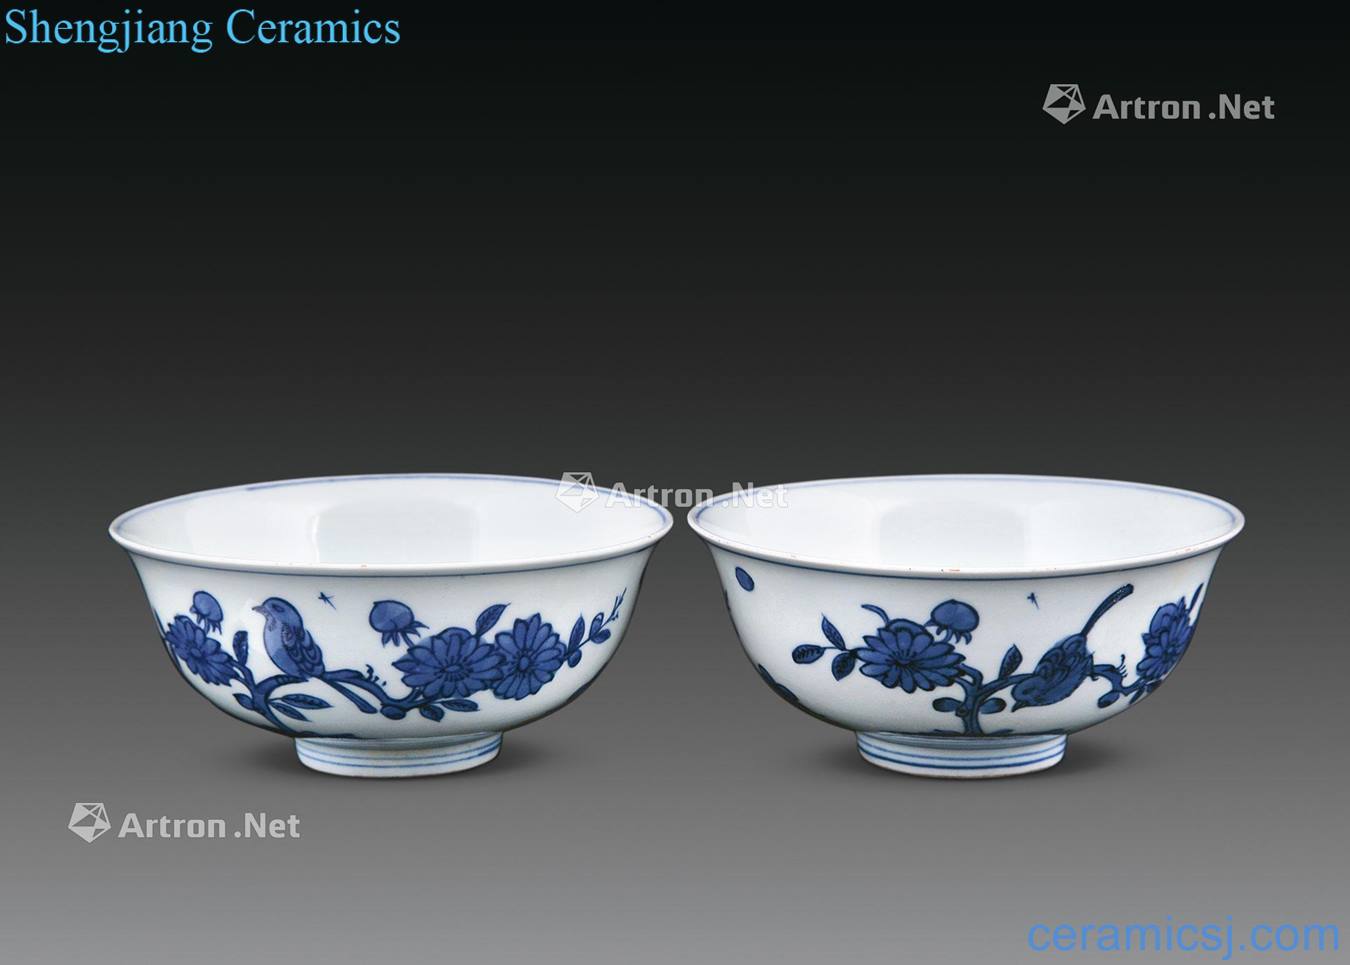 Ming Blue and white flowers and birds green-splashed bowls (a)